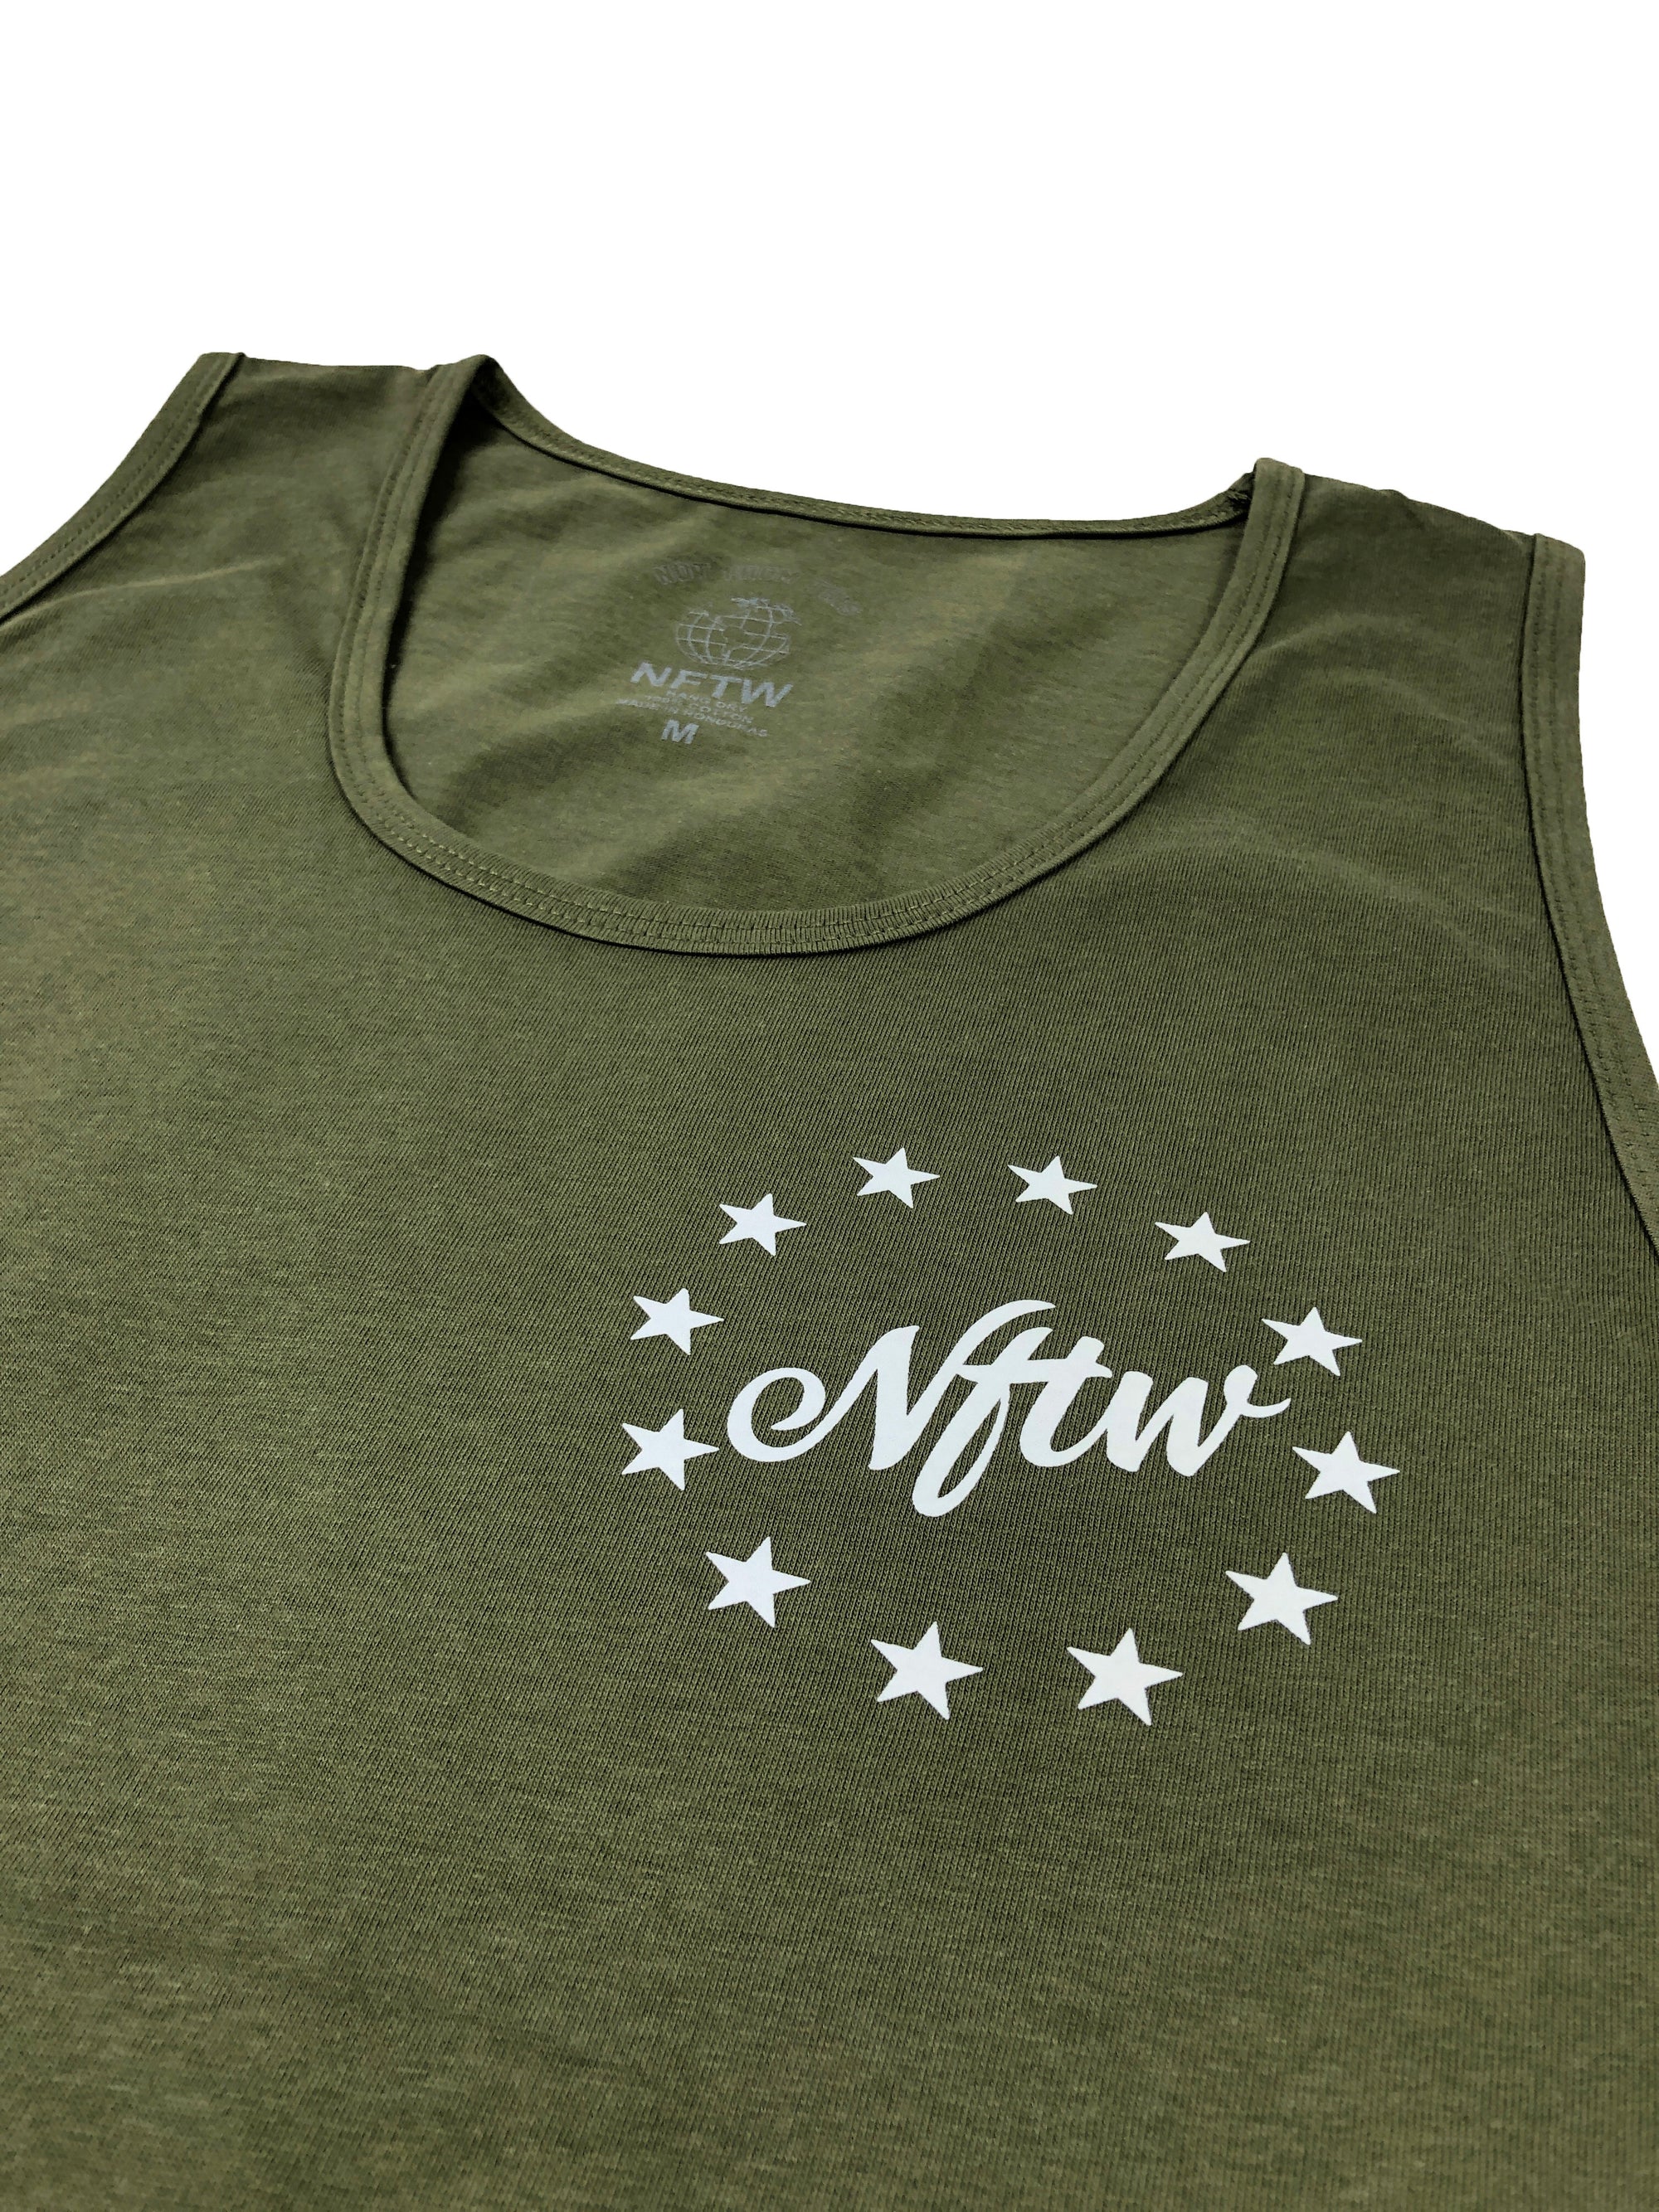 NFTW Tank Top in Olive